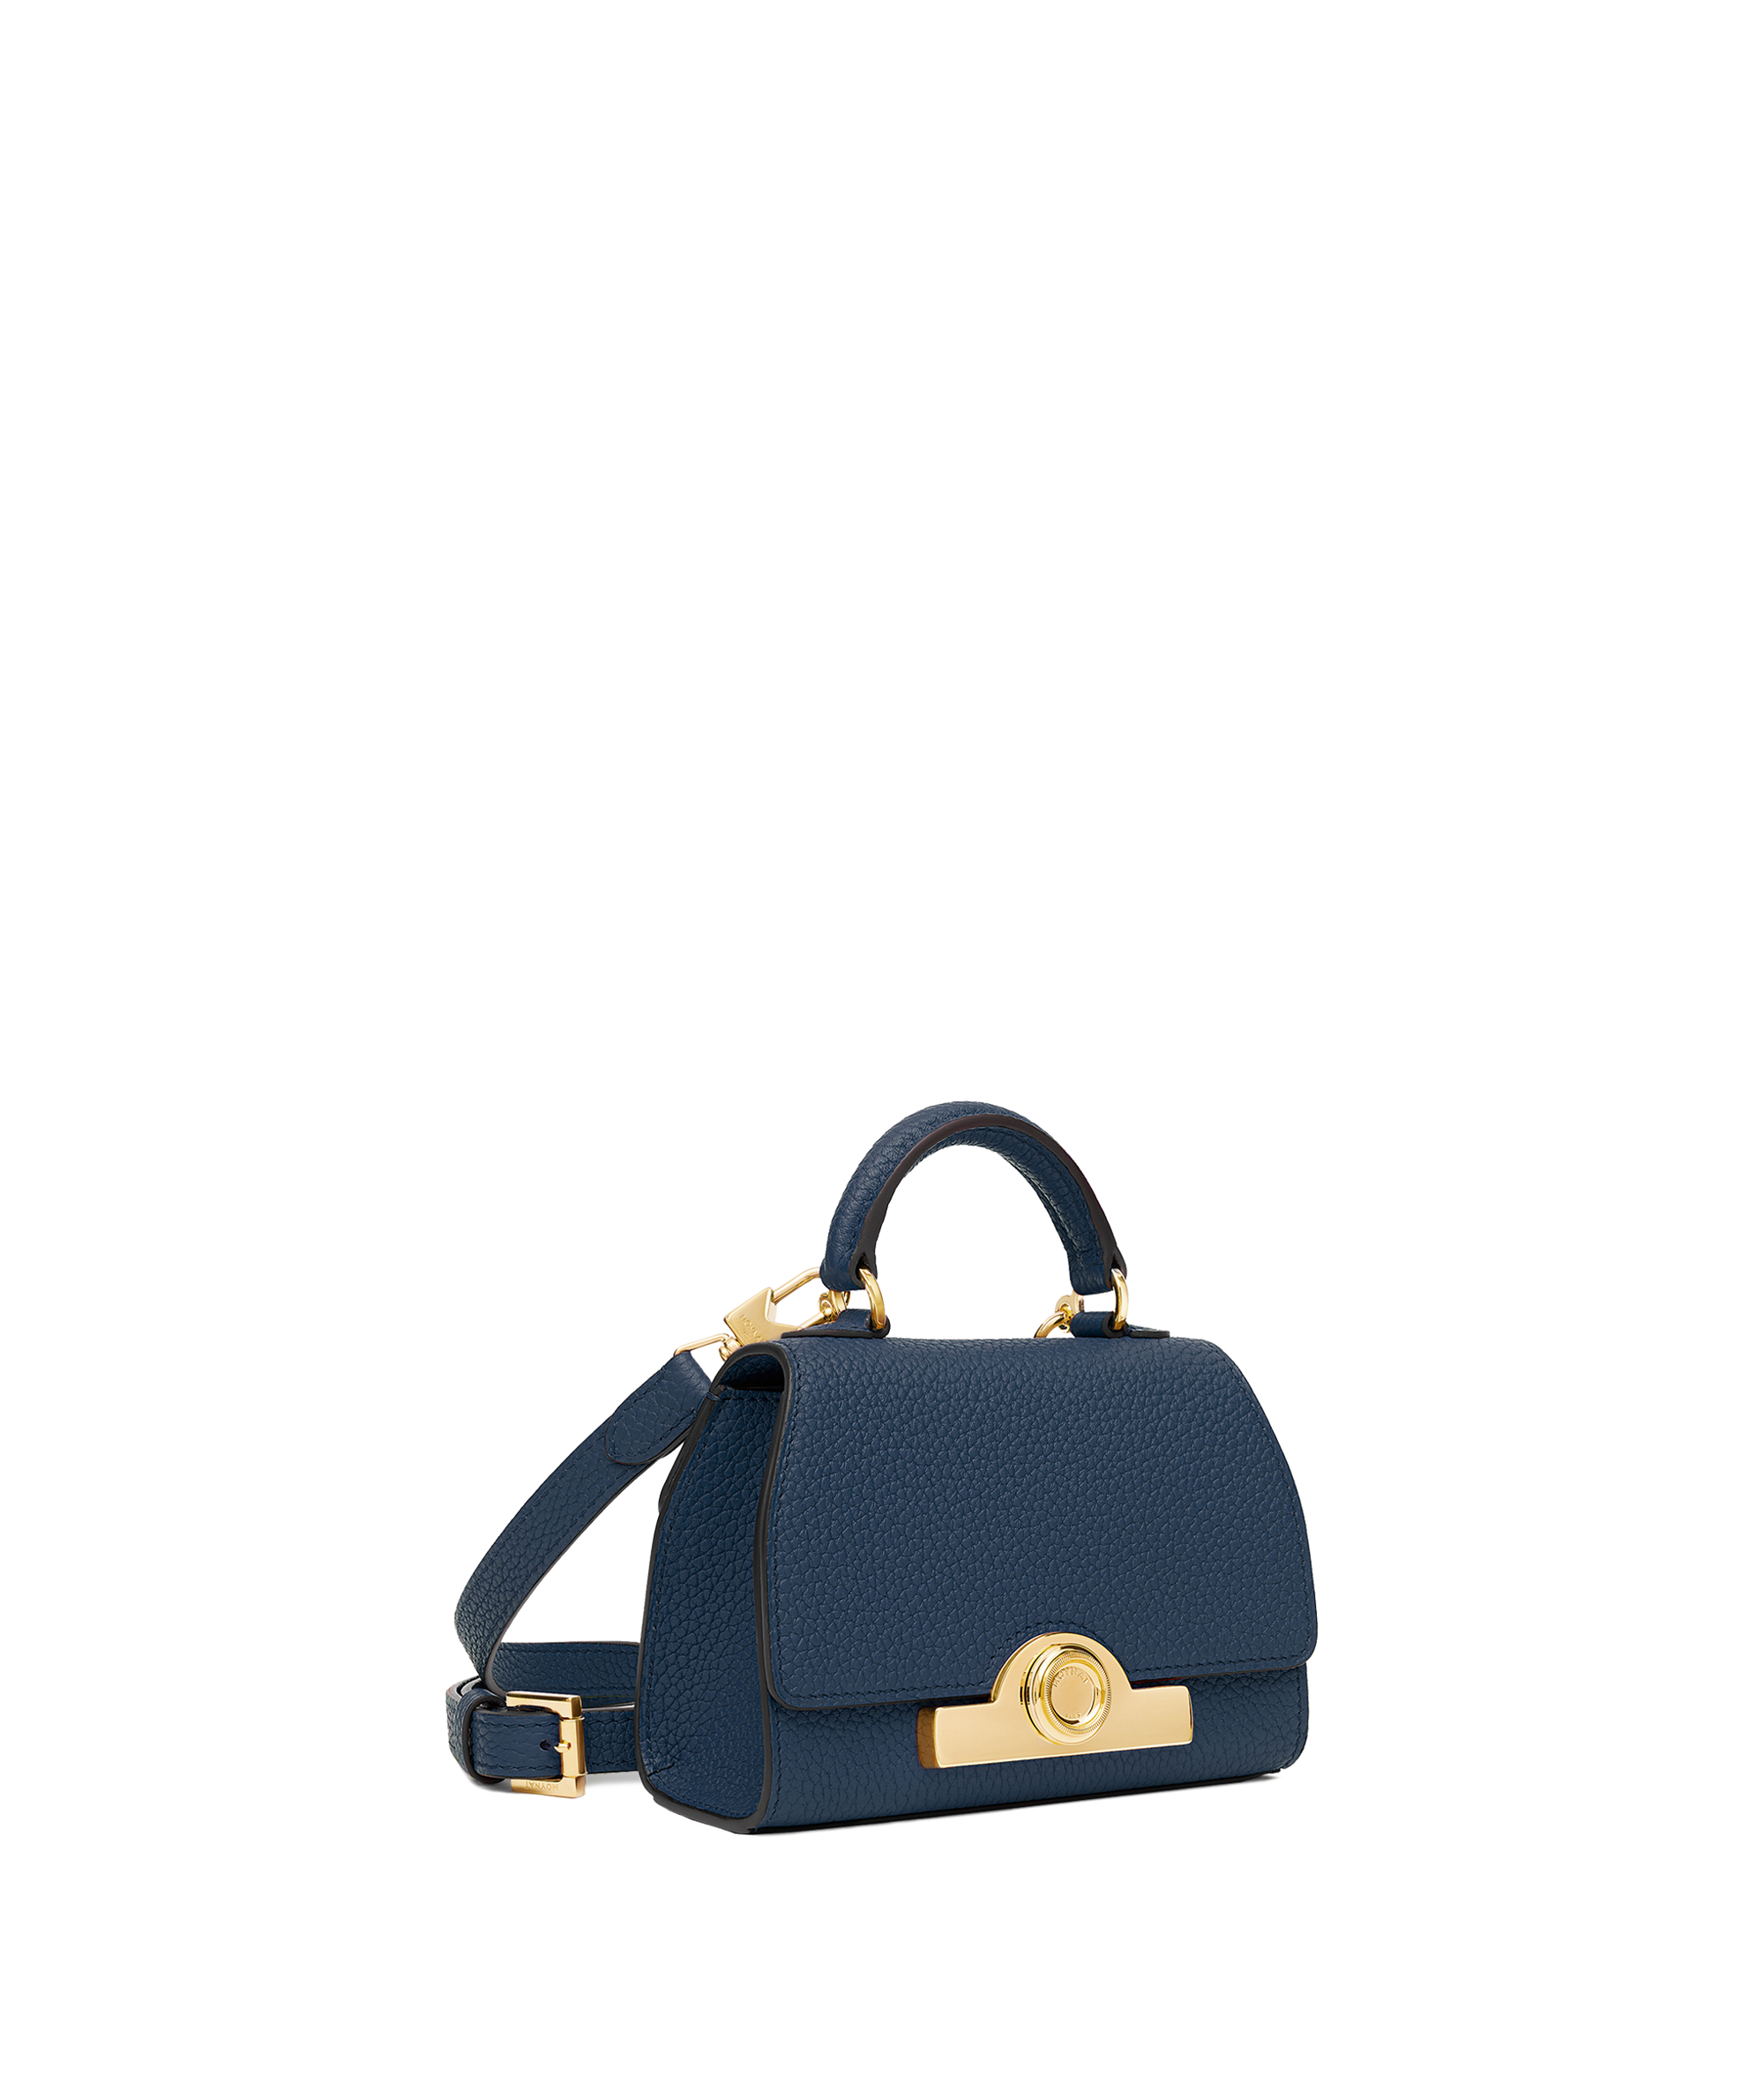 Moynat Rejane: Structured city bag in Taurillon Gex leather. Perle